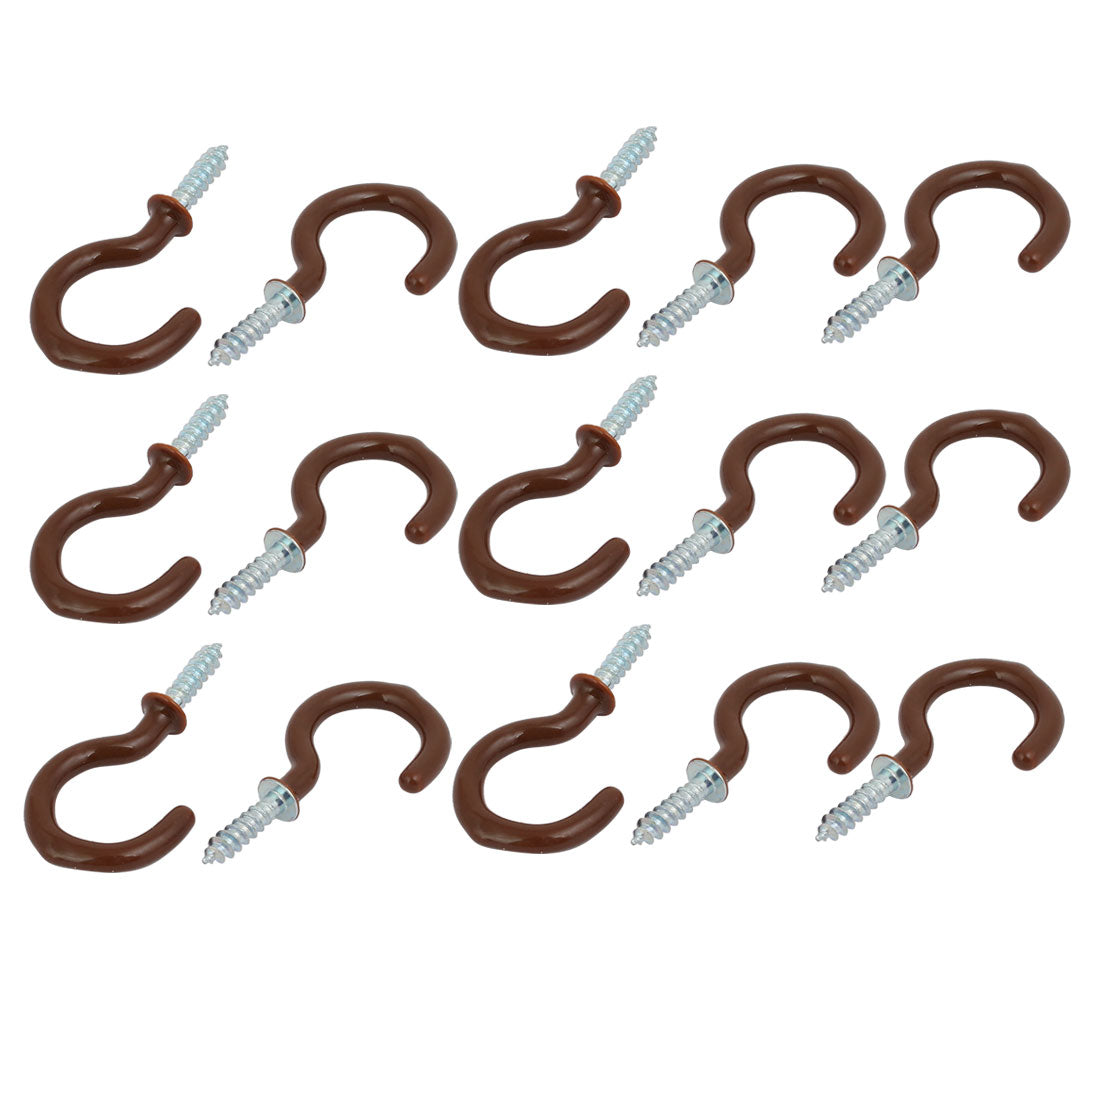 uxcell Uxcell 1 Inch Plastic Coated Screw-in Open Cup Ceiling Hooks Hangers Brown 15pcs